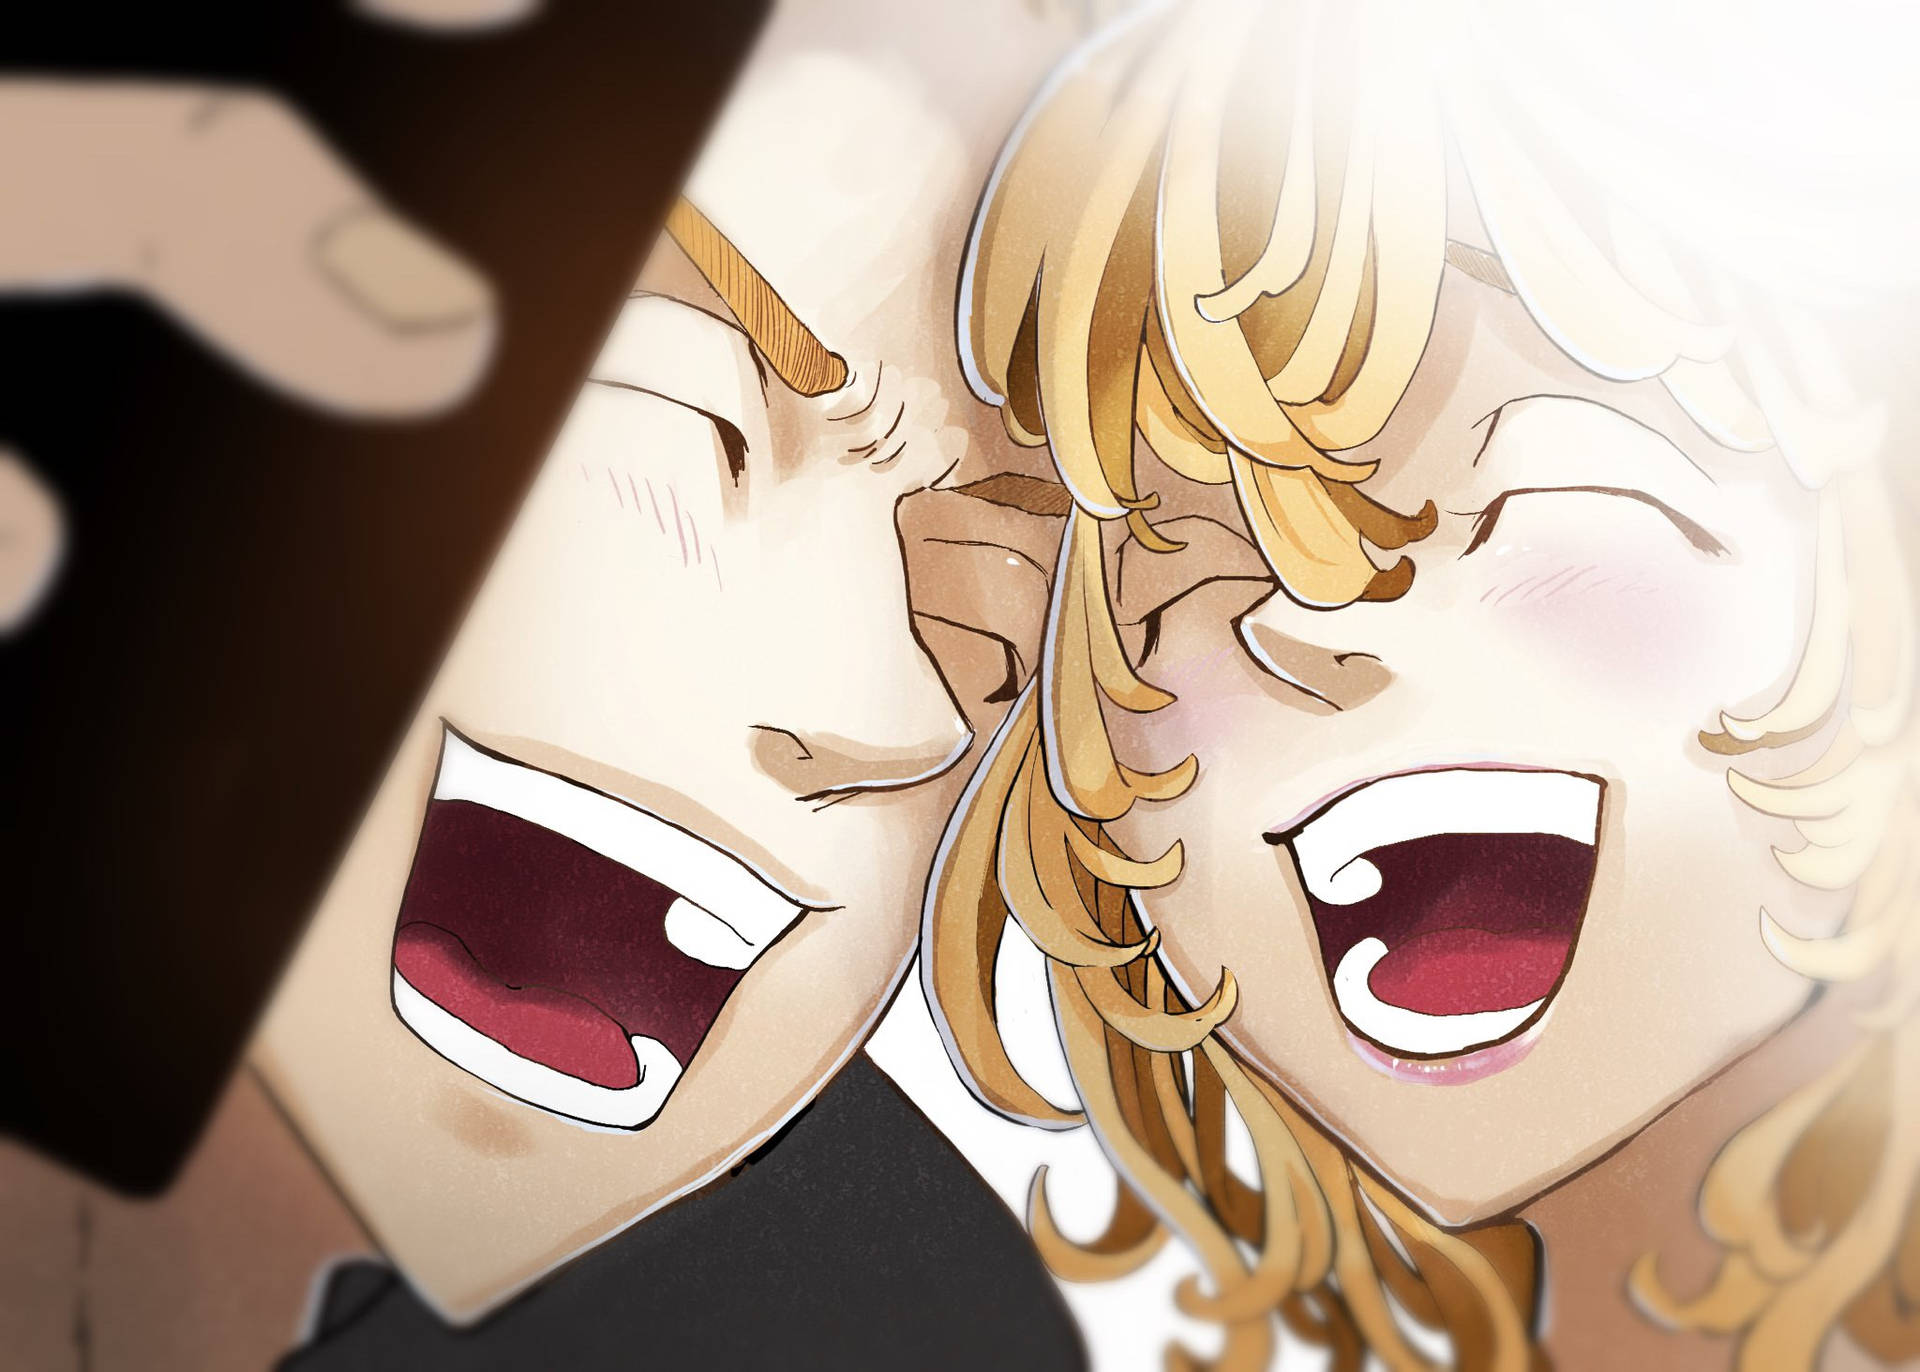 Ken And Mikey Selfie From Tokyo Revengers Manga Background